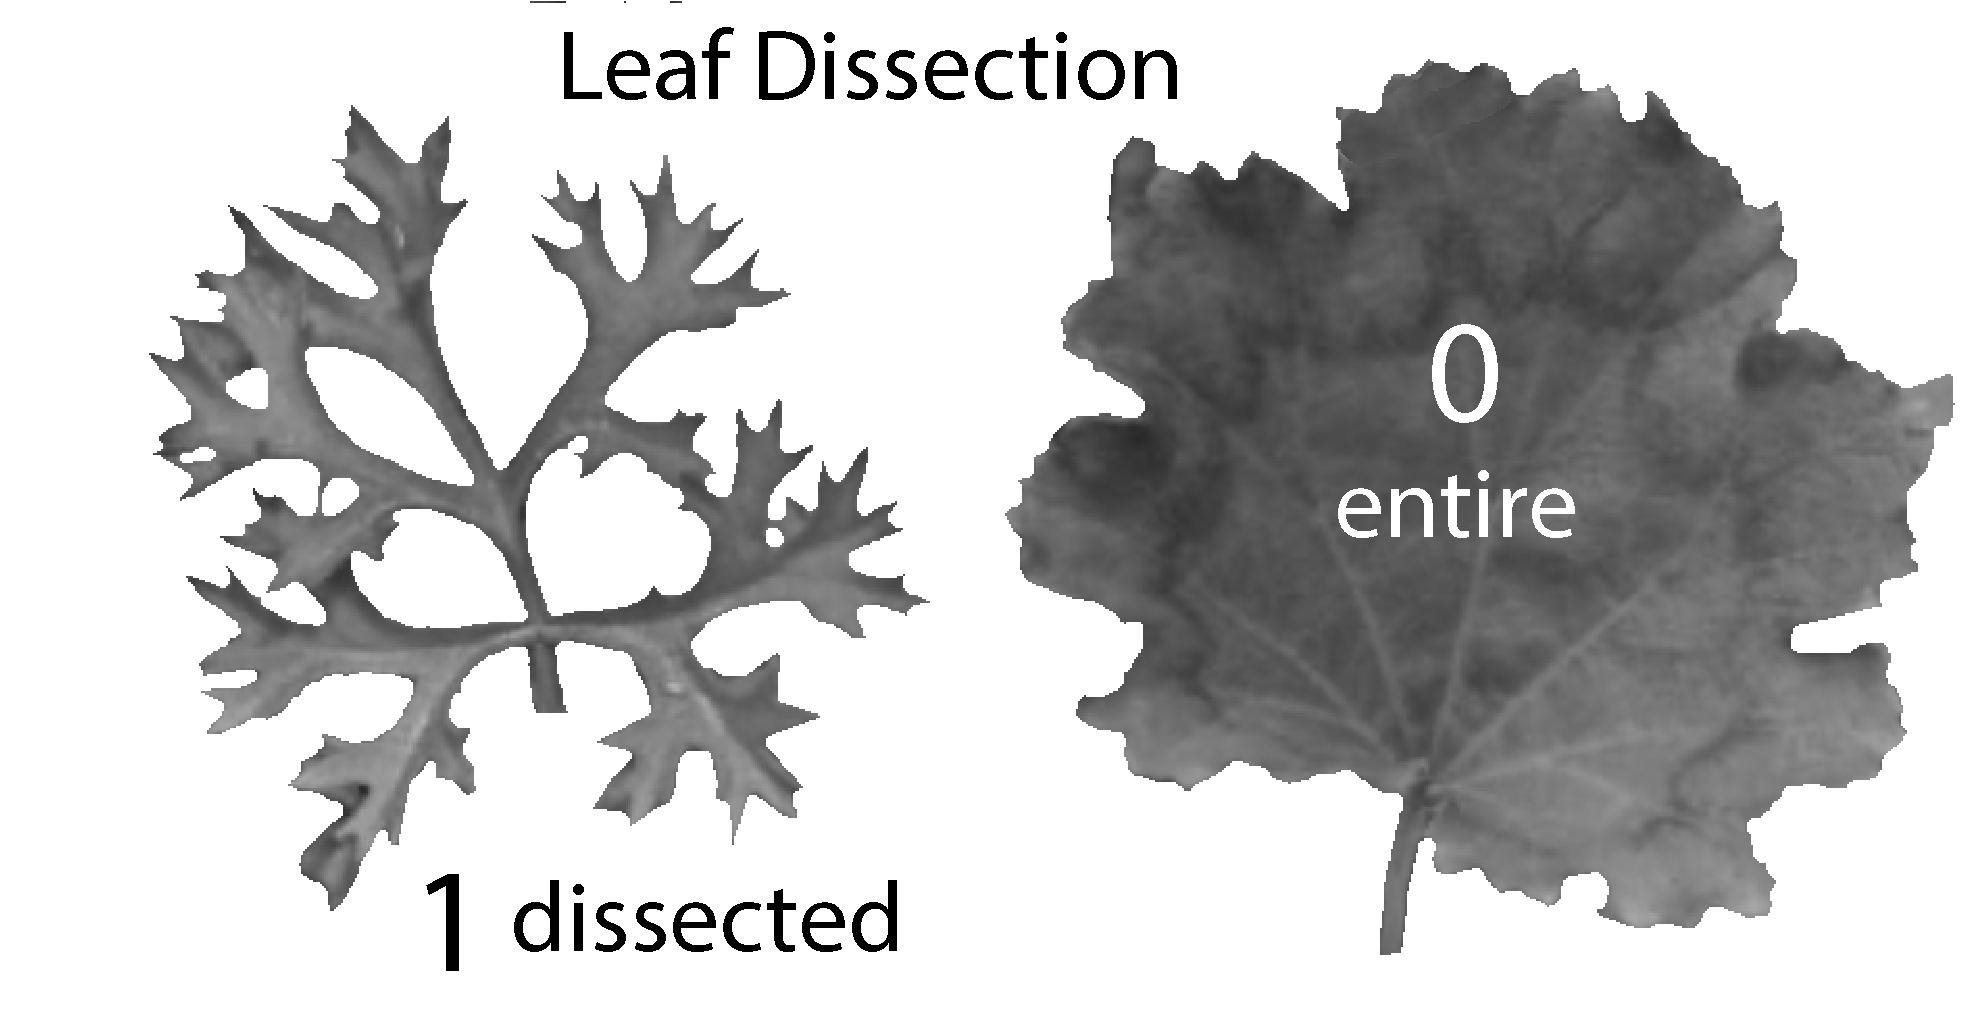 From Fig. 1E and 1F of the paper